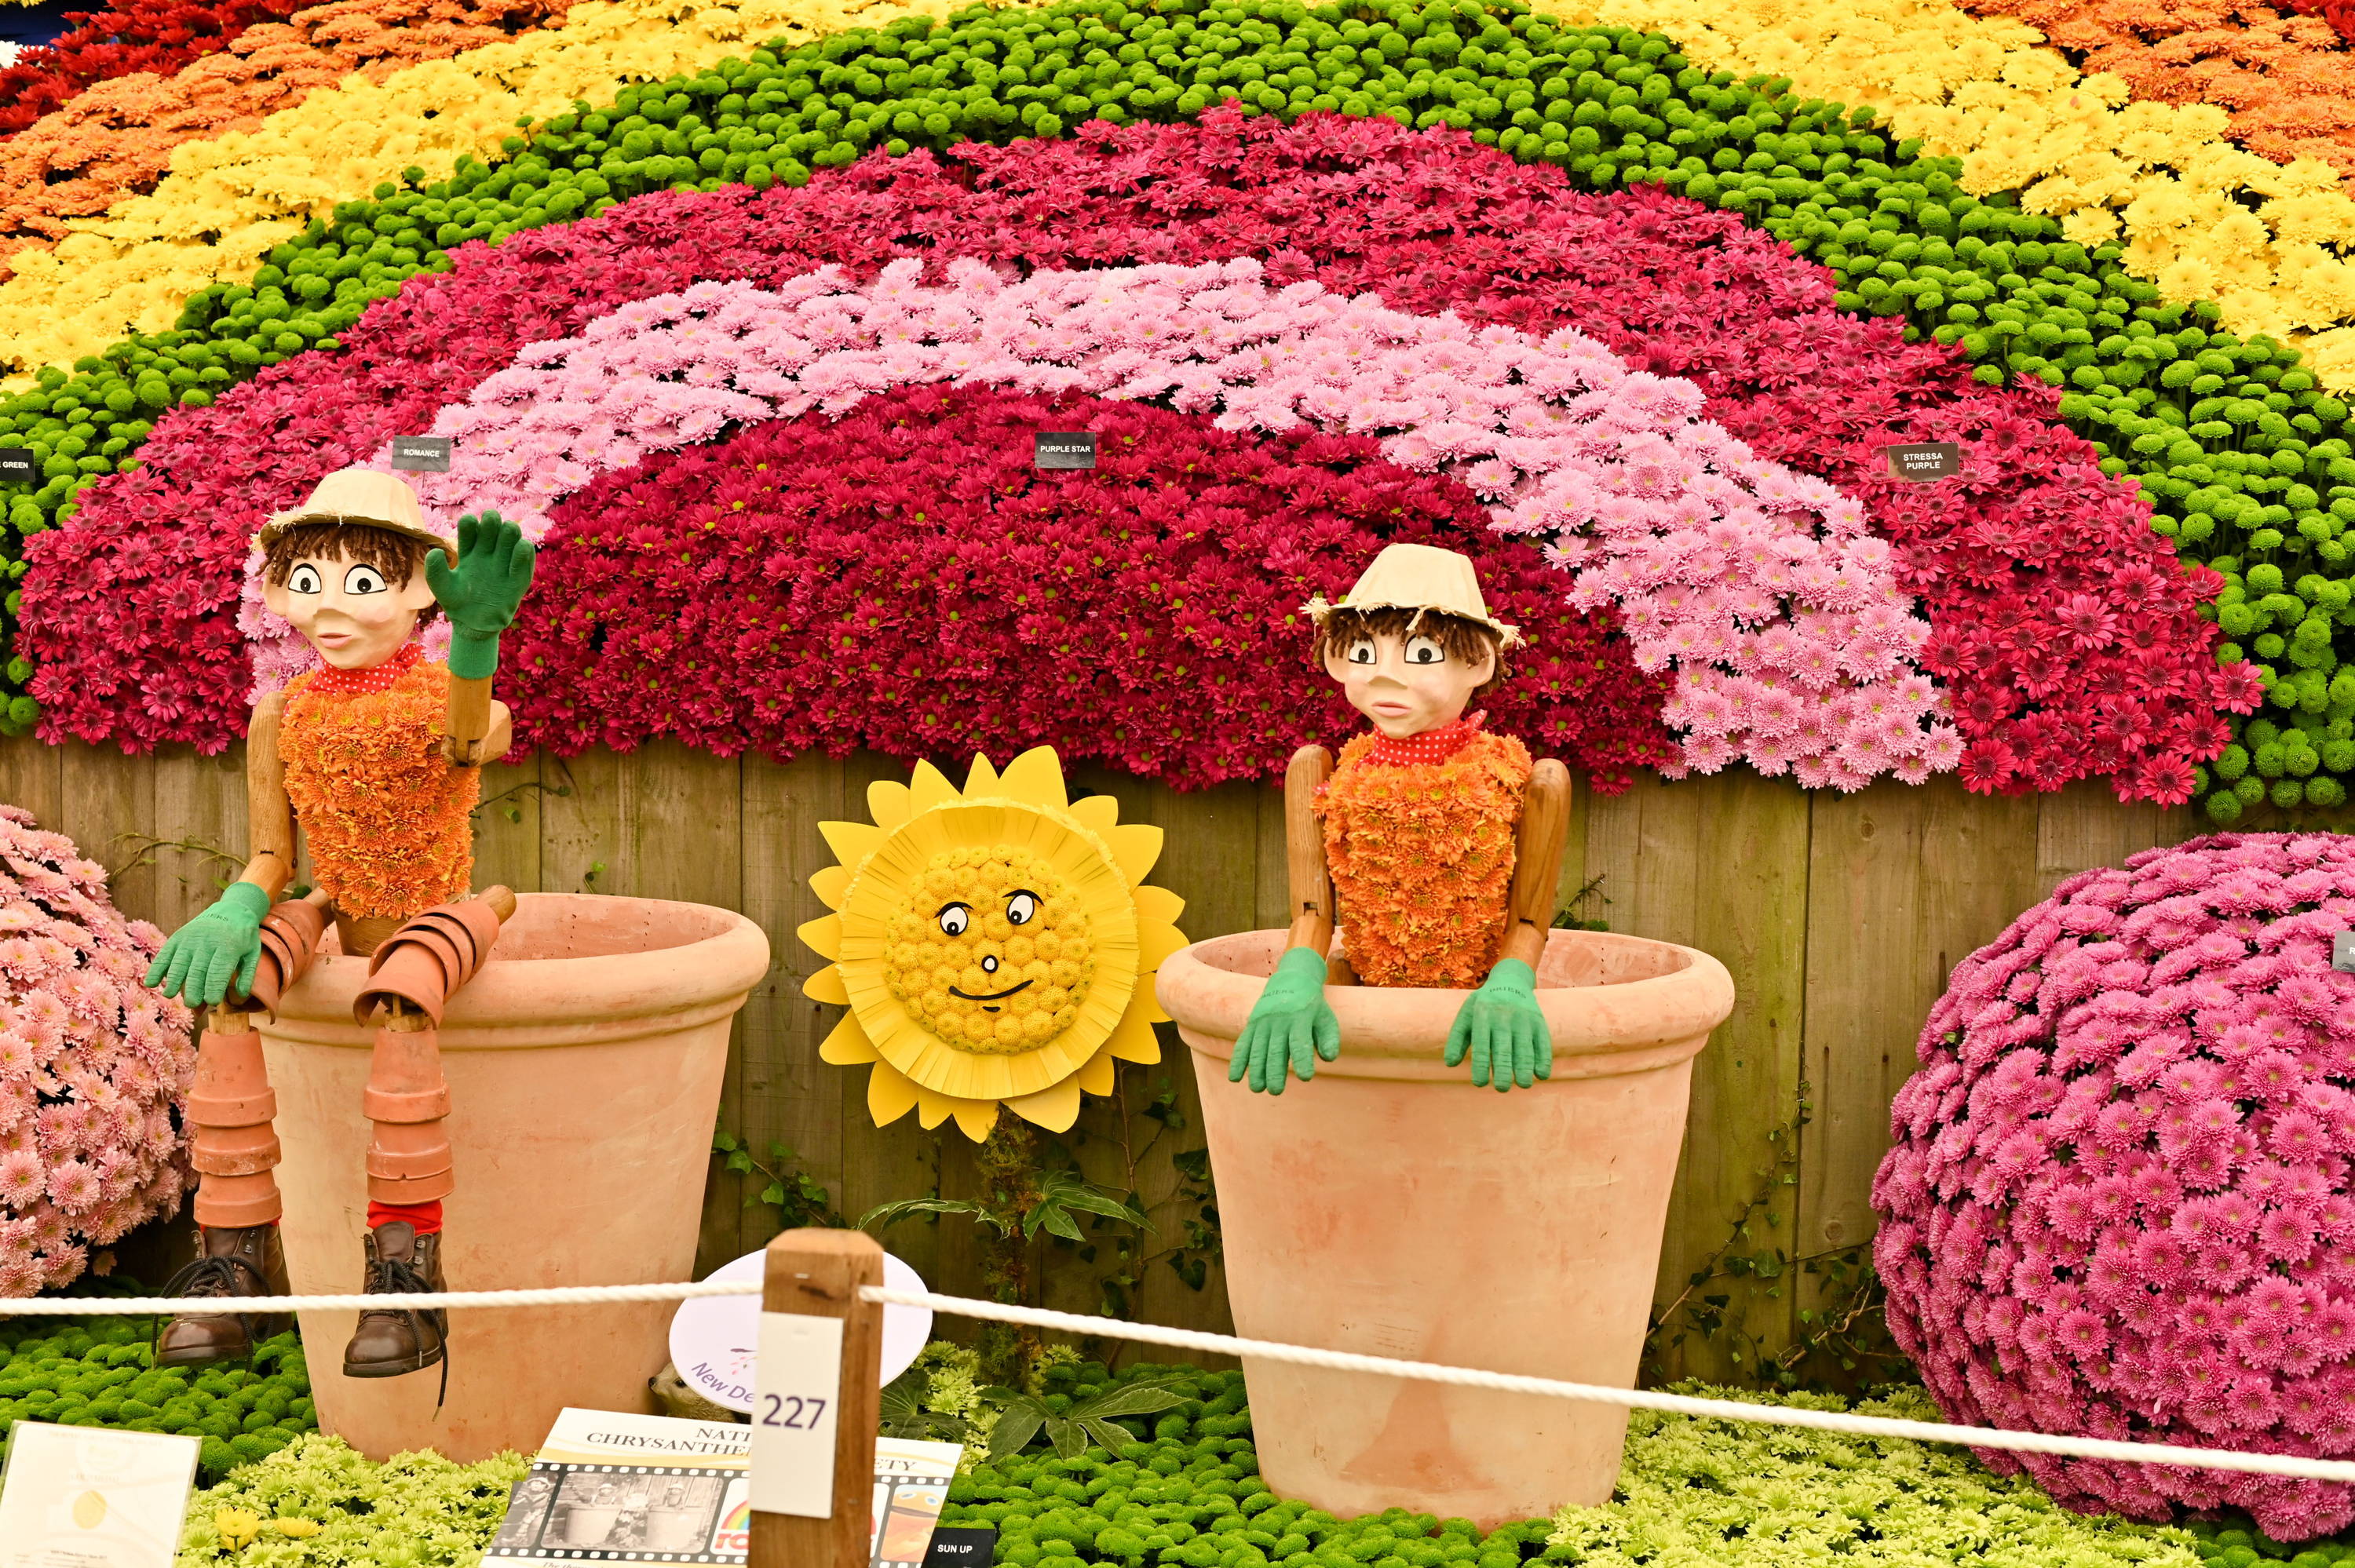 Mums at the 2019 Chelsea Flower Show